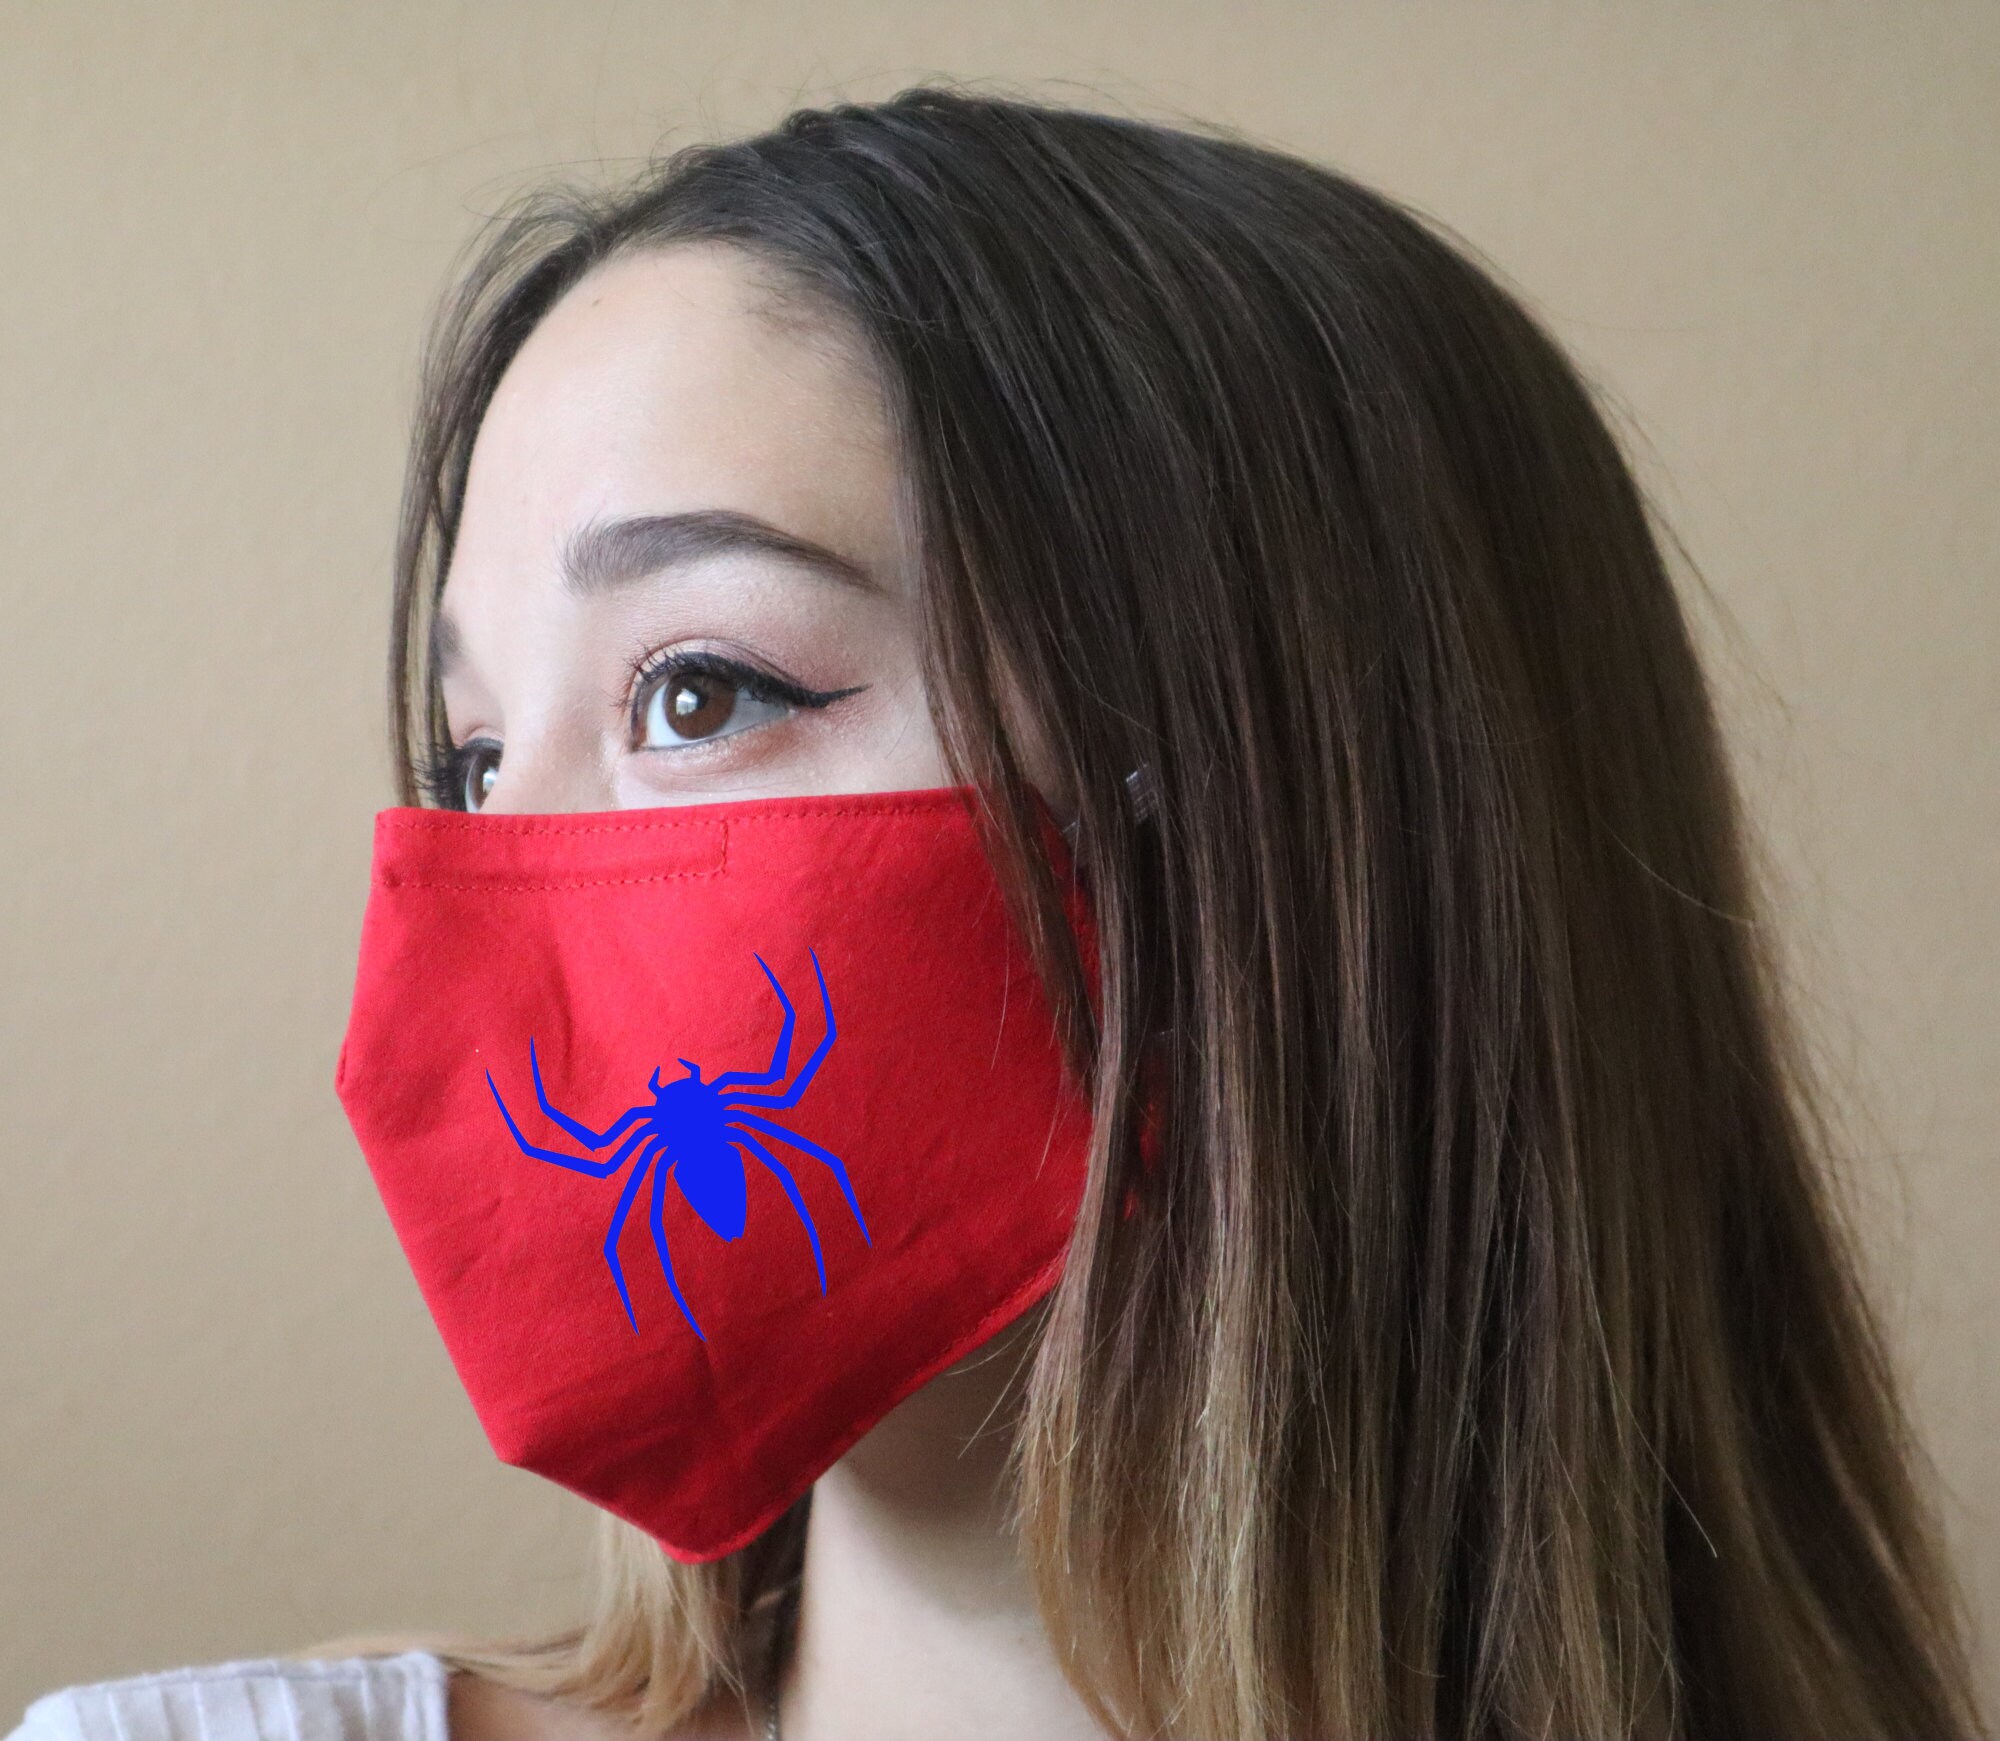 Handmade Cotton Blend Customizable Face Masks With Adjustable Ear-Loops - Super Heroes Spider-Man Adult Small 8 X 5"